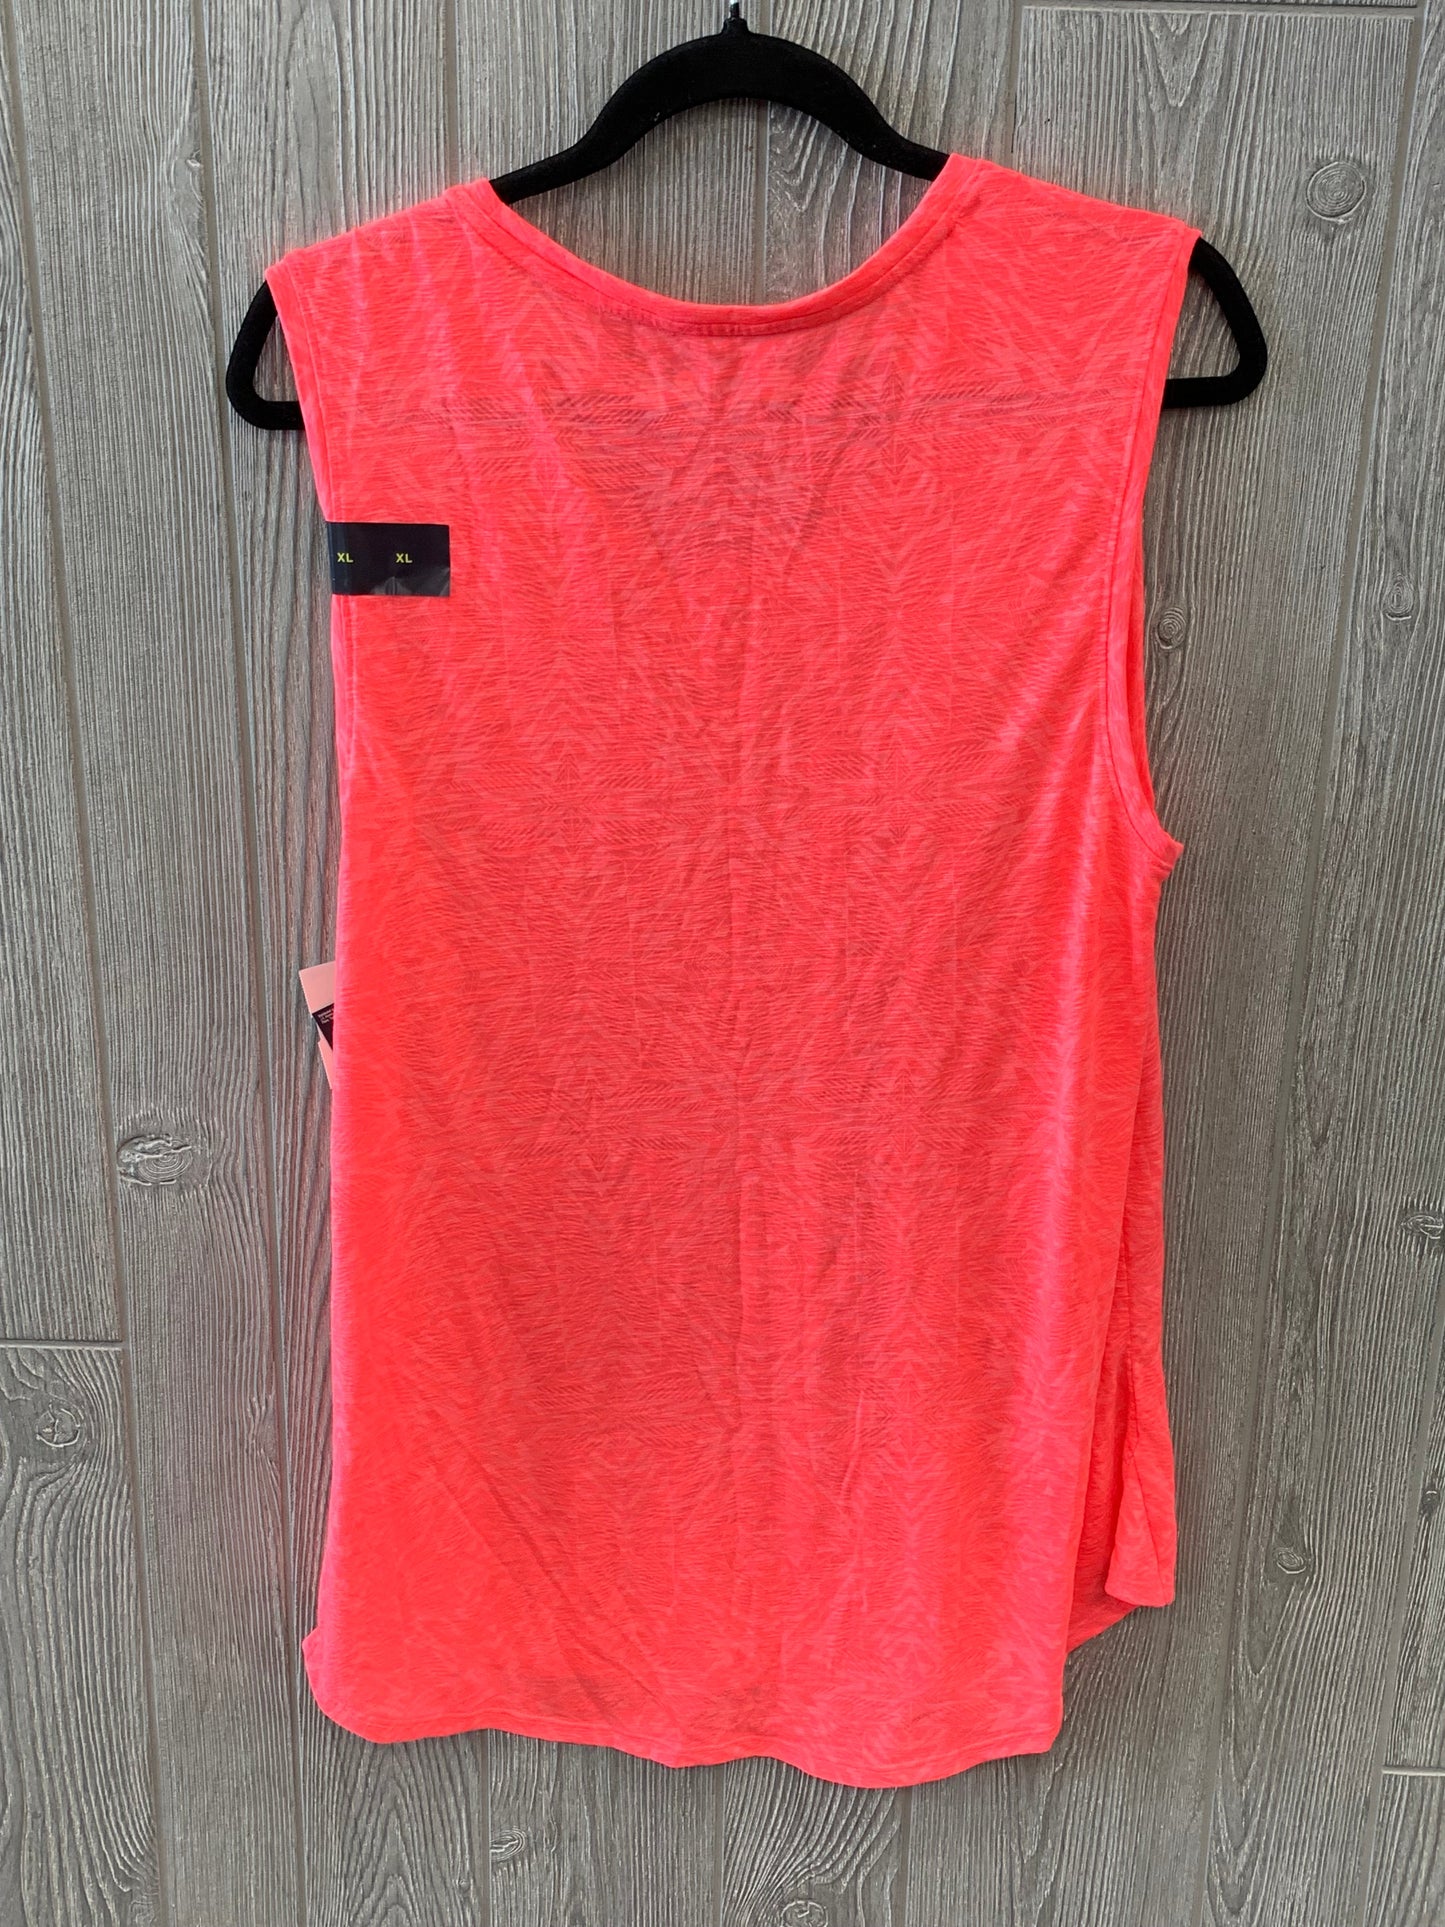 Pink Athletic Tank Top Xersion, Size Xl